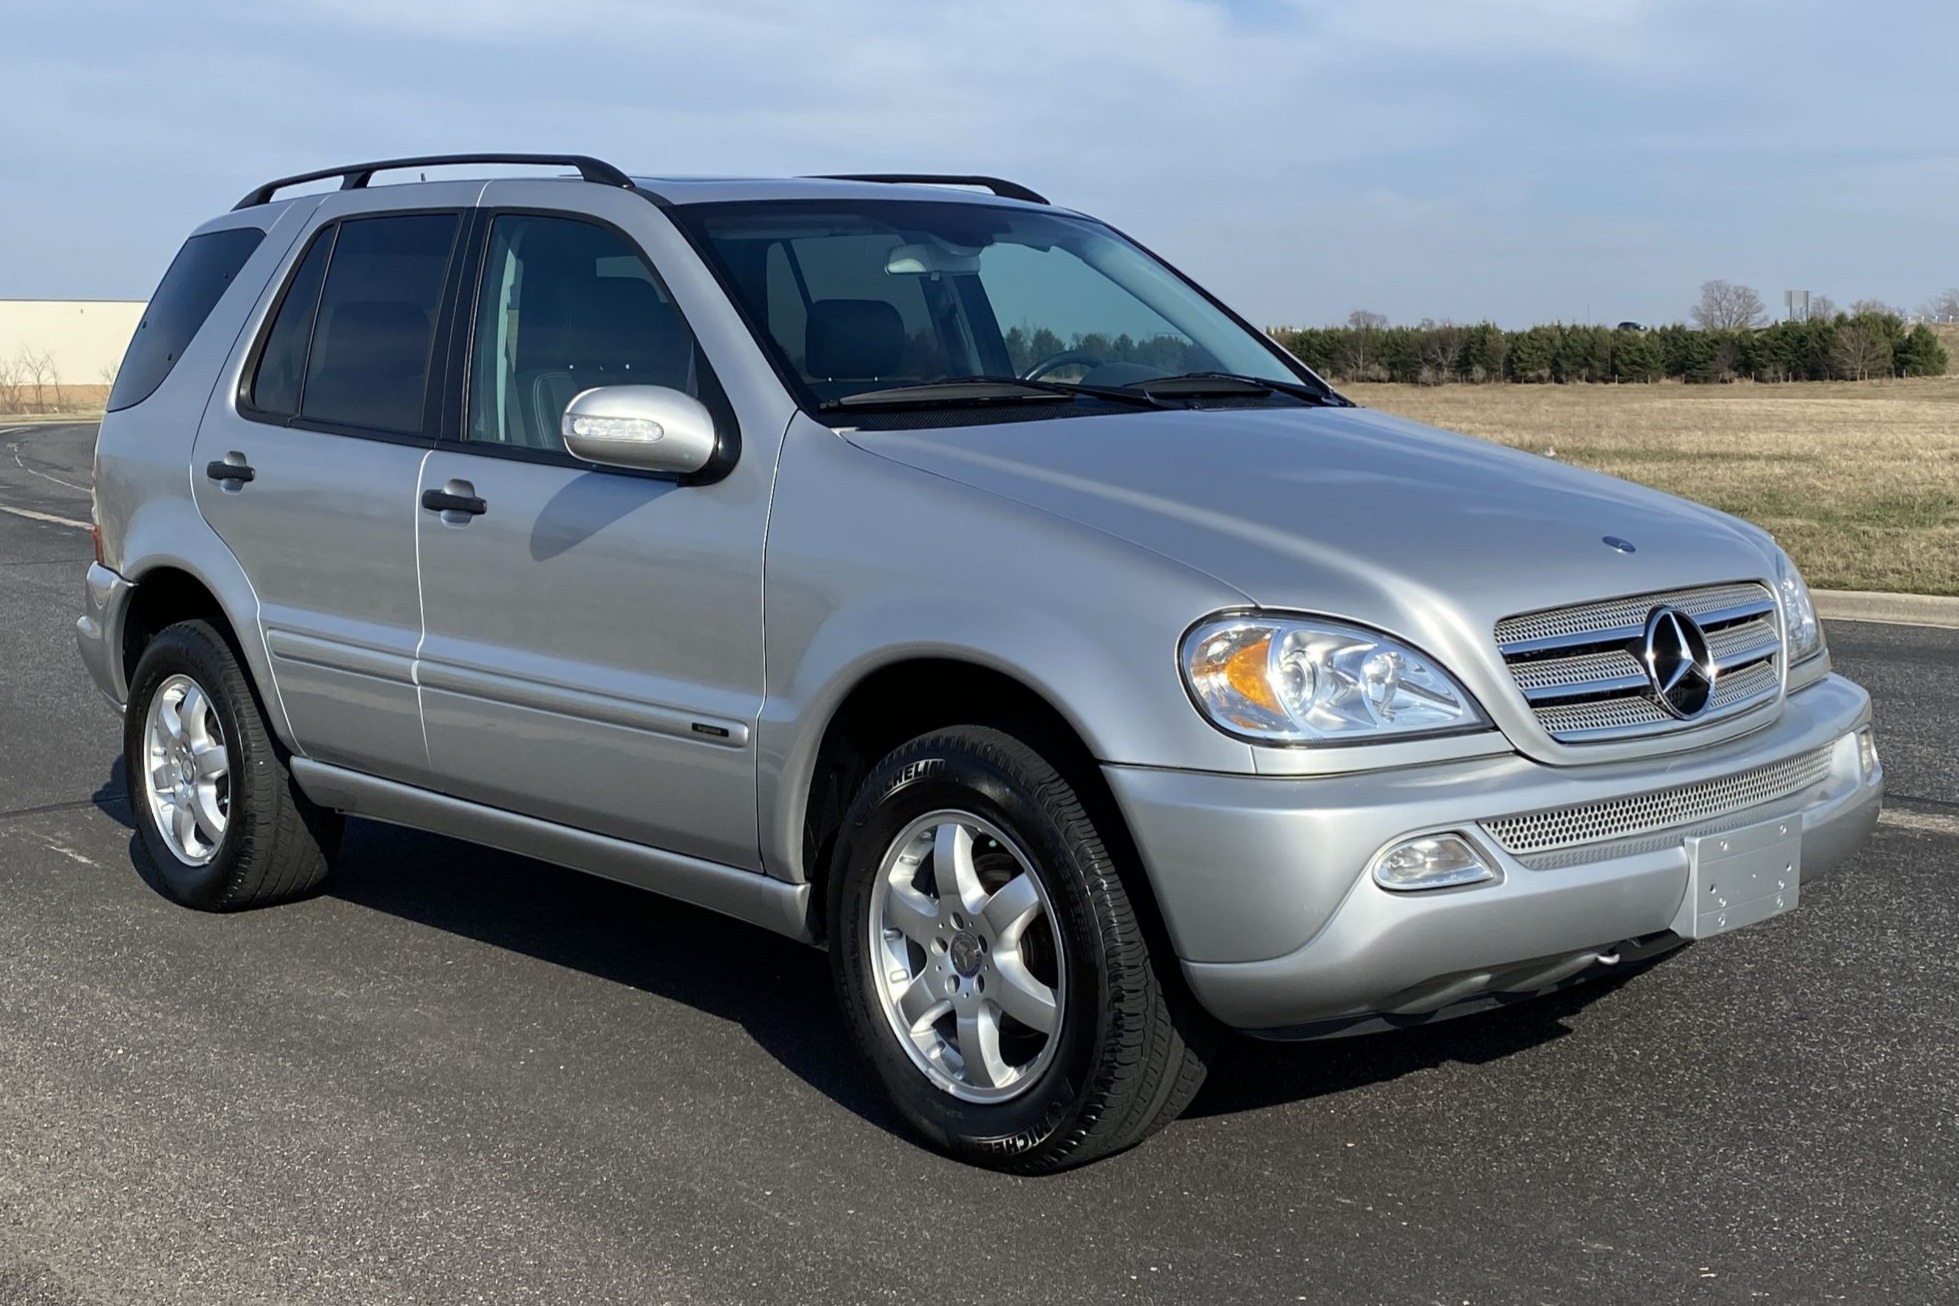 Unveiling the 2003 MercedesBenz ML350: 34 Problems and Customer Complaints